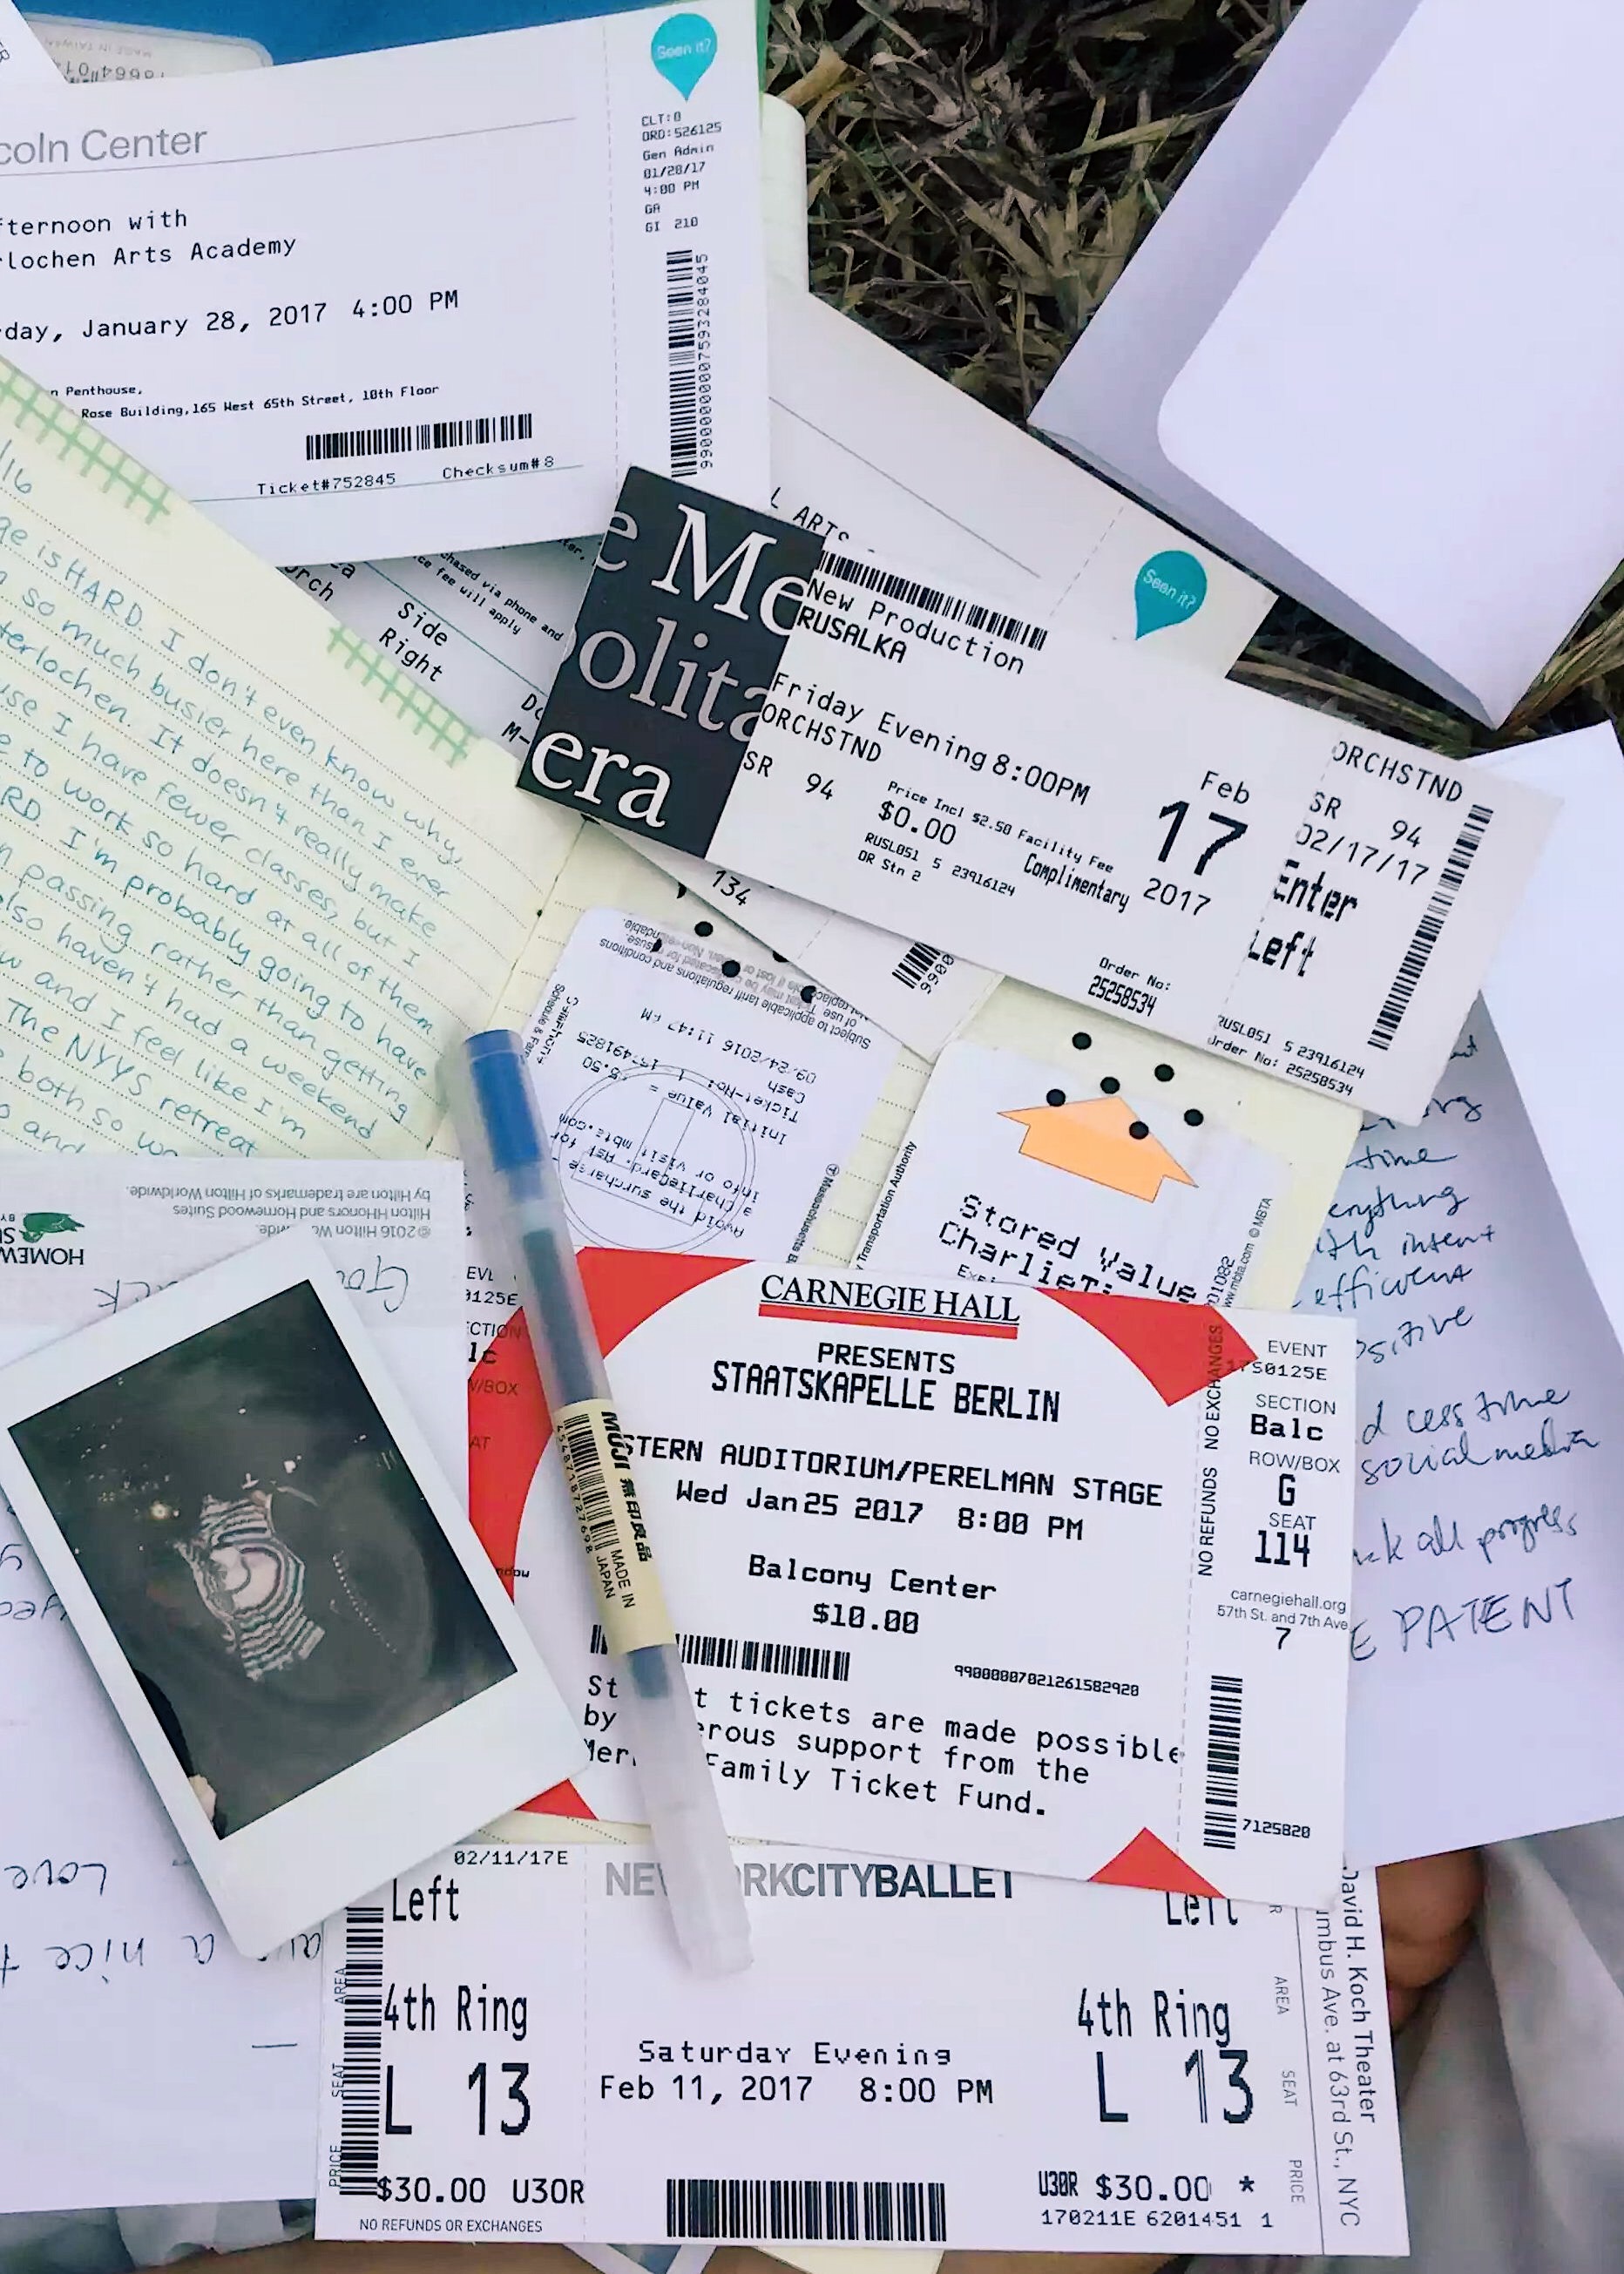 A pile of ticket stubs